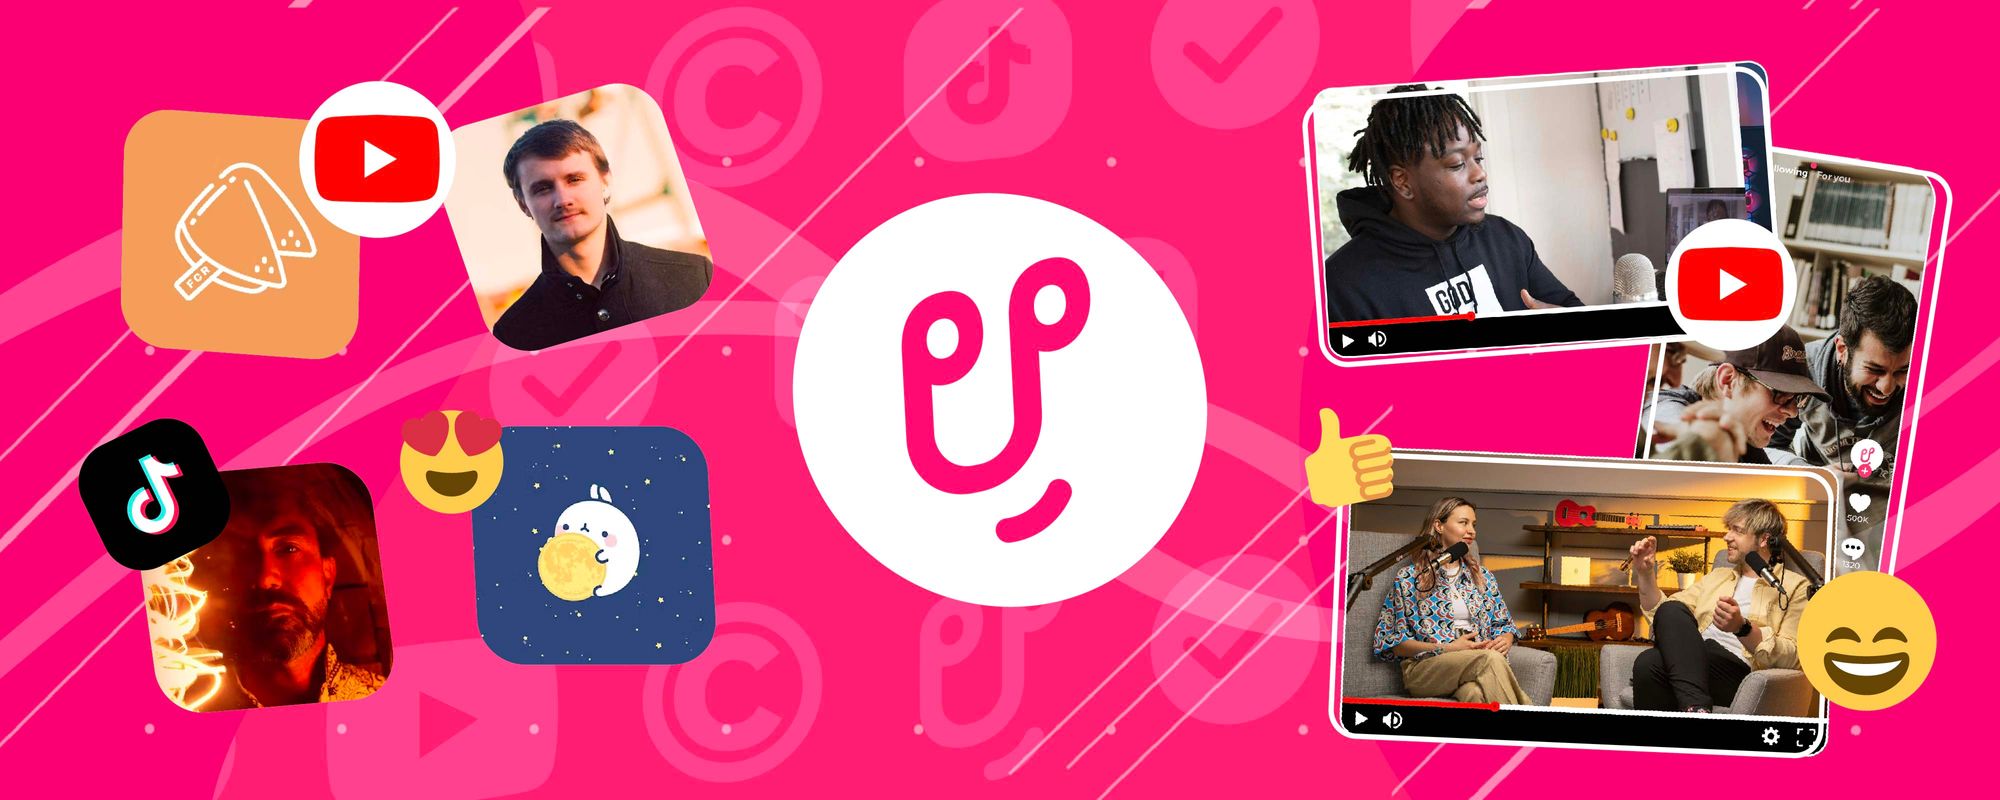 Images of Uppbeat's artists alongside different creators to show the relationship between the two that comes with music licensing.